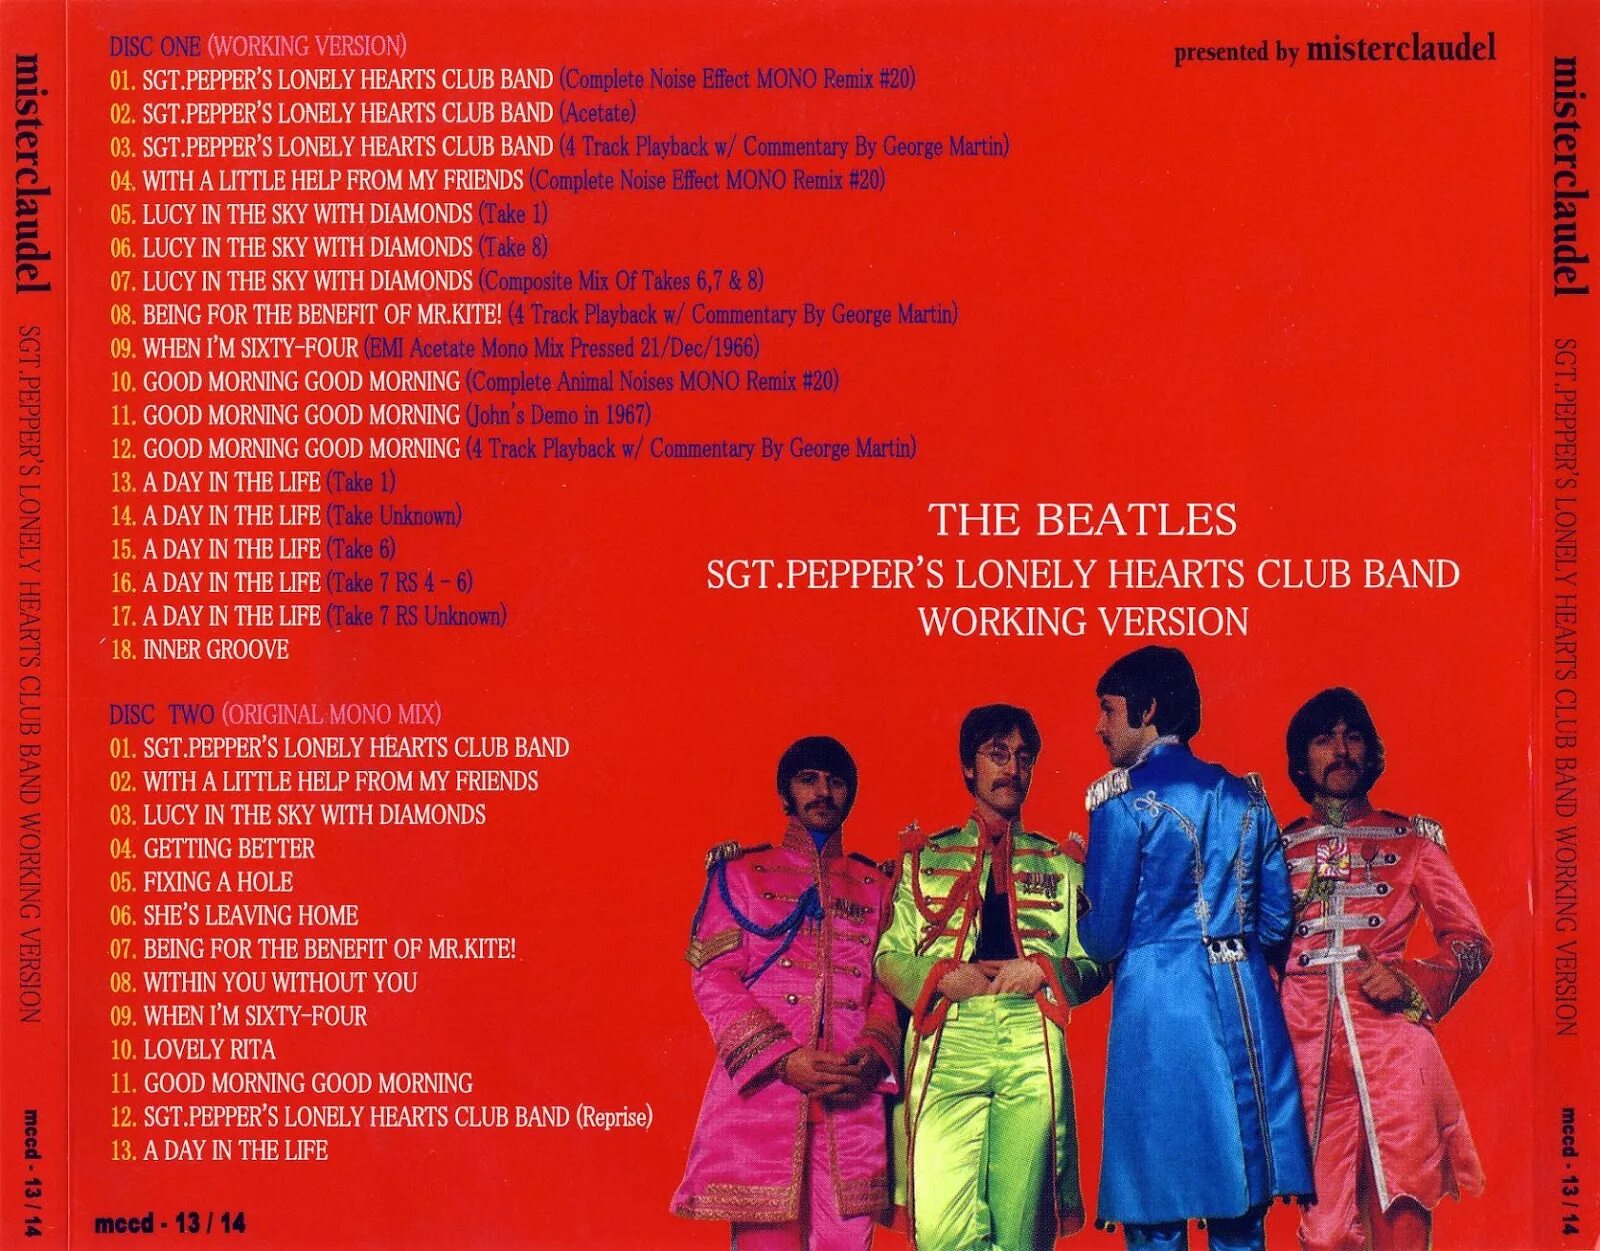 Beatles sgt peppers lonely hearts club. The Beatles Sgt. Pepper's Lonely Hearts Club Band 1967. The Beatles Sgt. Pepper's Lonely Hearts Club Band обложка. Битлз сержант Пеппер. Beatles - Sgt. Pepper's Lonely Hearts Club Band (LP).